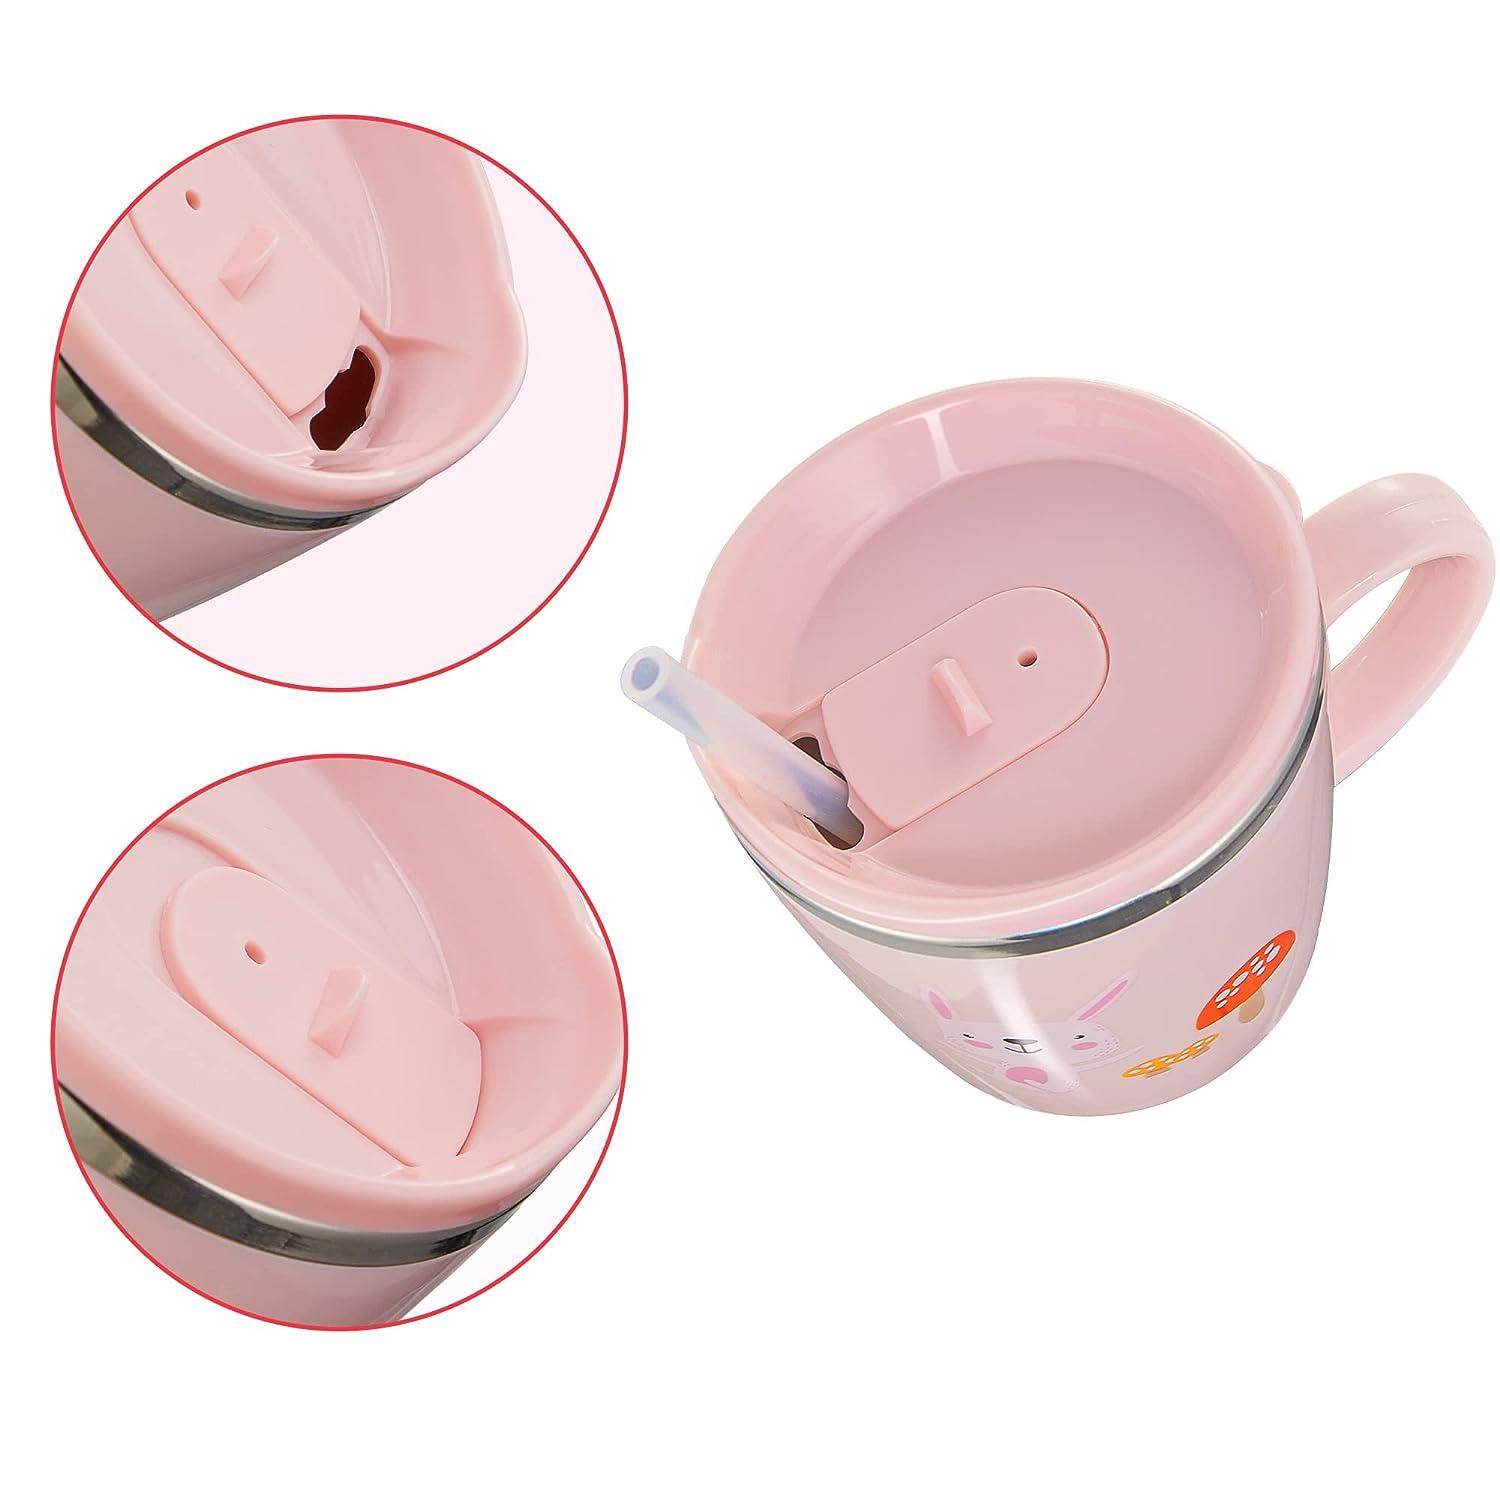  Valueder Kids Baby Toddler Cups Mug Sippy Learning Trainer Cup  for Milk Coffee Hot Chocolate Stainless Steel Trainer Straw Cup with Lid,  Rabbit, 7oz/Peacock pink : Baby